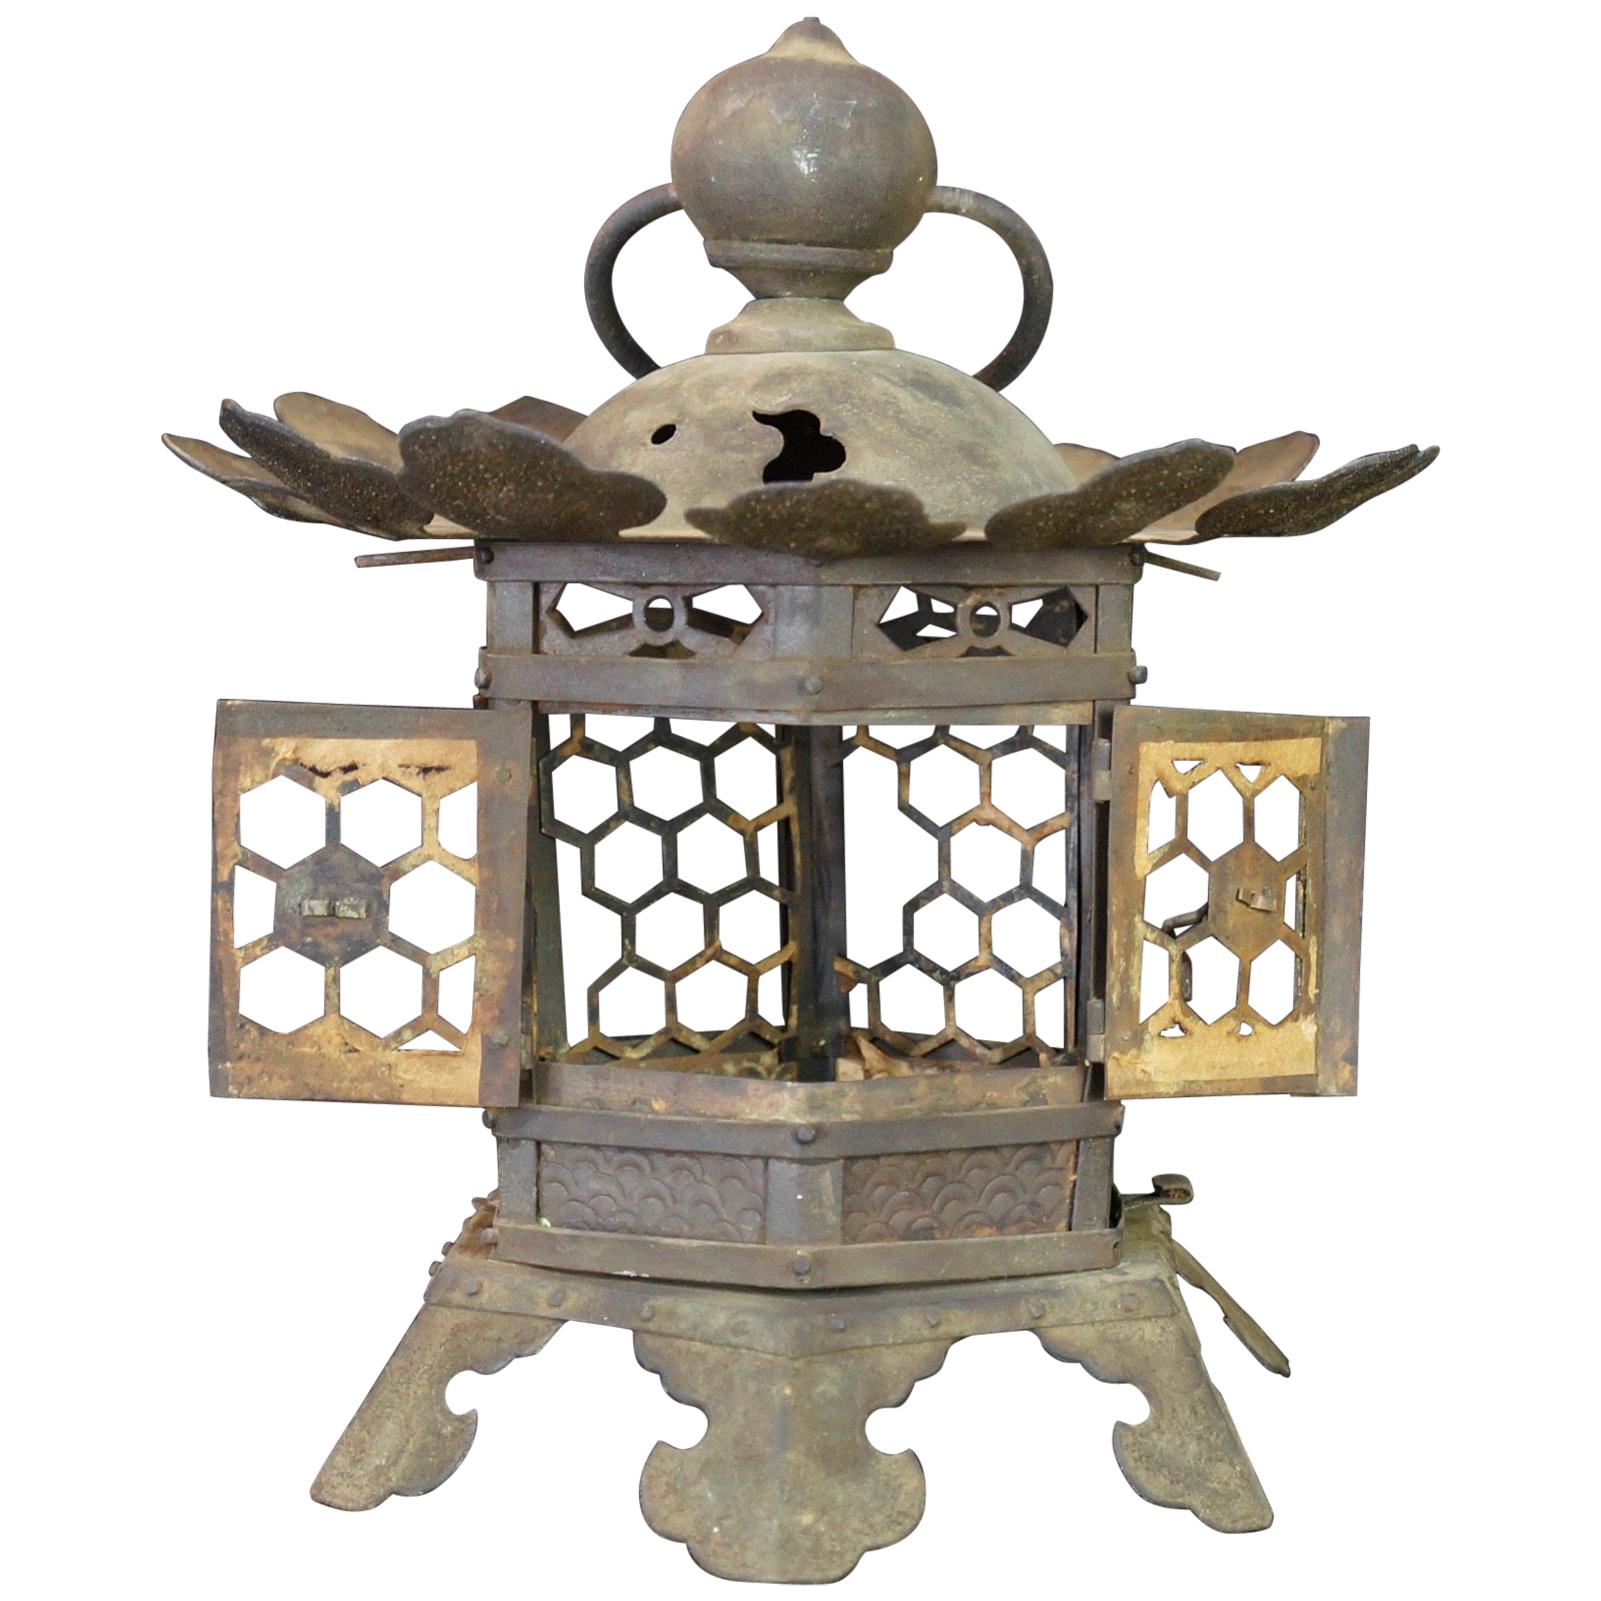 Japanese Tall Antique Lantern with Double Doors and Fine Details, 12"